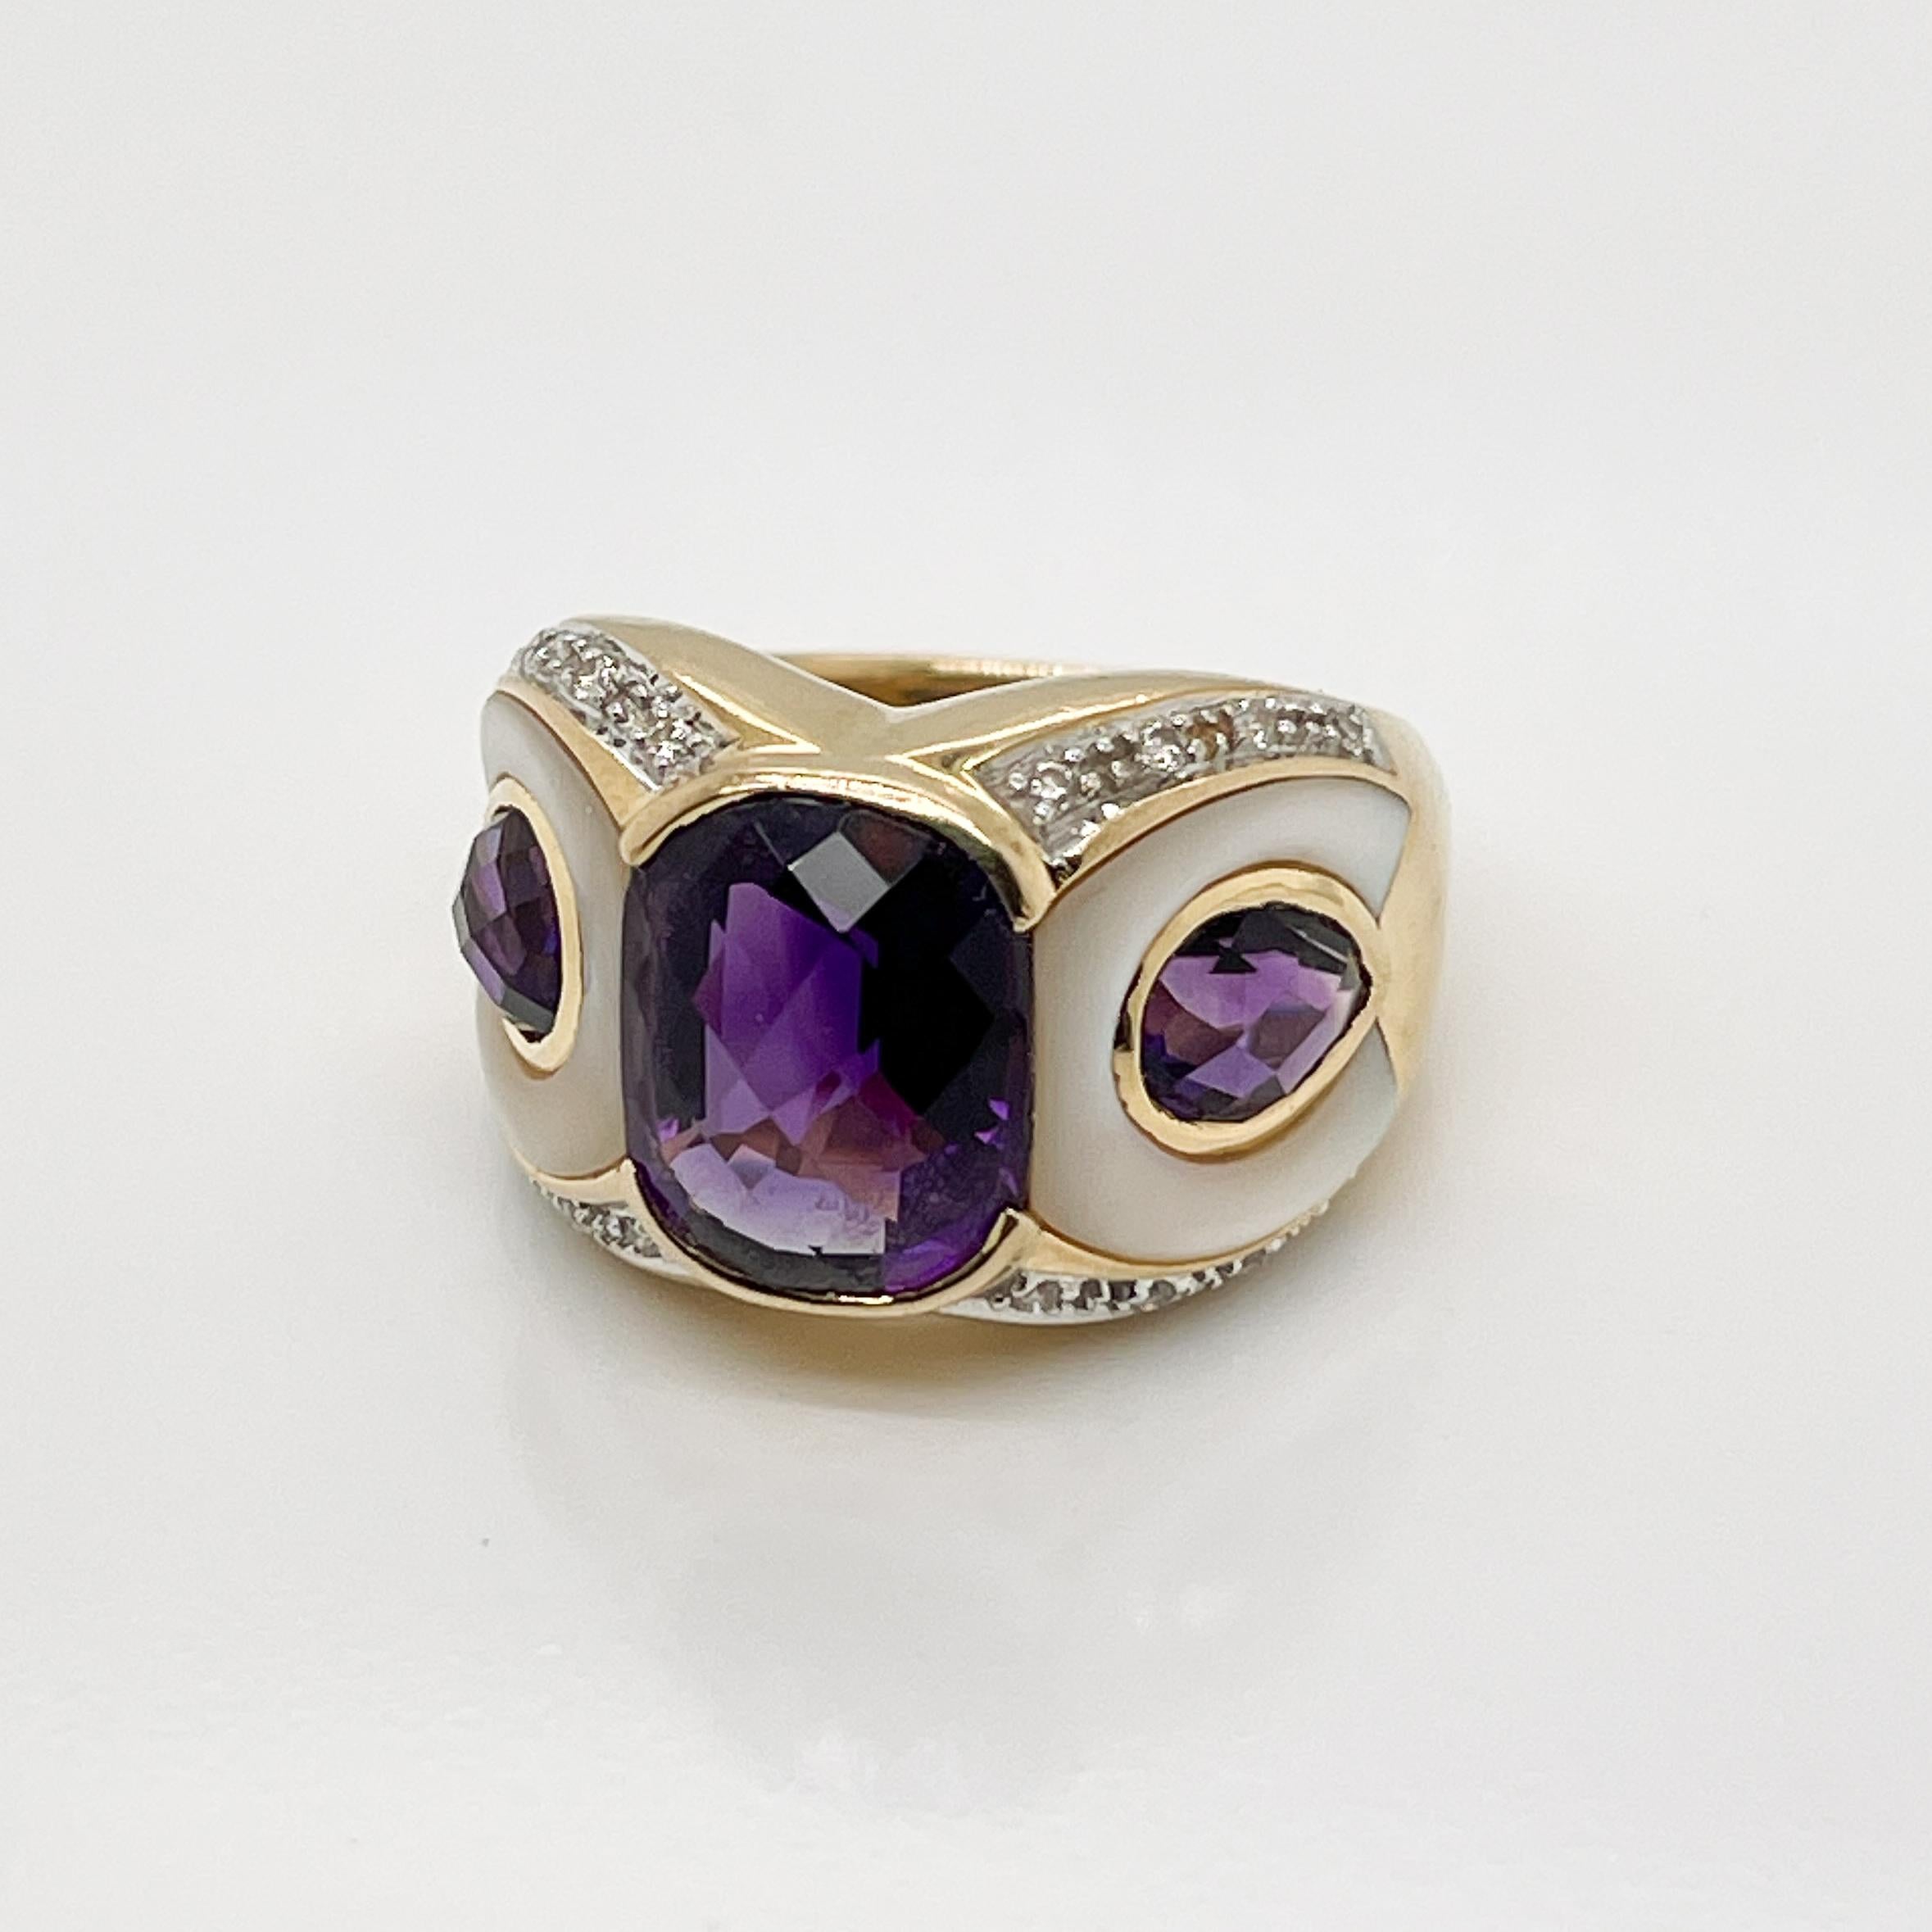 A very fine vintage figural owl or parrot ring. 

Set with checkerboard-cut cushion and pear shaped amethysts for a beak and eyes and flanked by bezel set mother-of-pearl and round brilliant cut prong-set accent diamonds.

Simply a wonderful